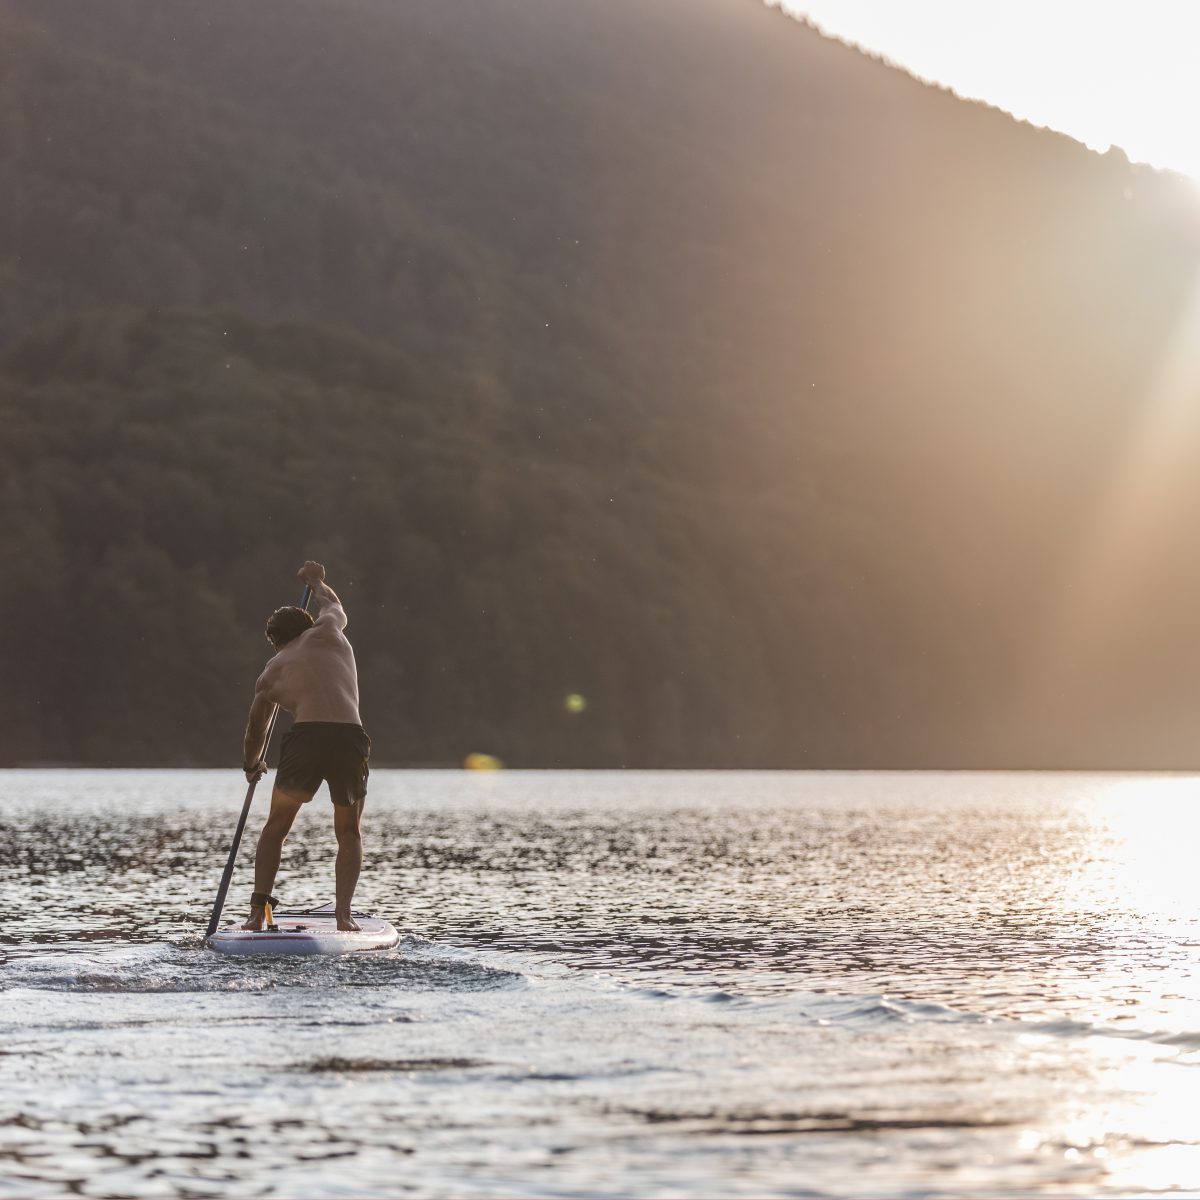 KISKA product management consultant paddle boarding on an Austrian alpine lake after work